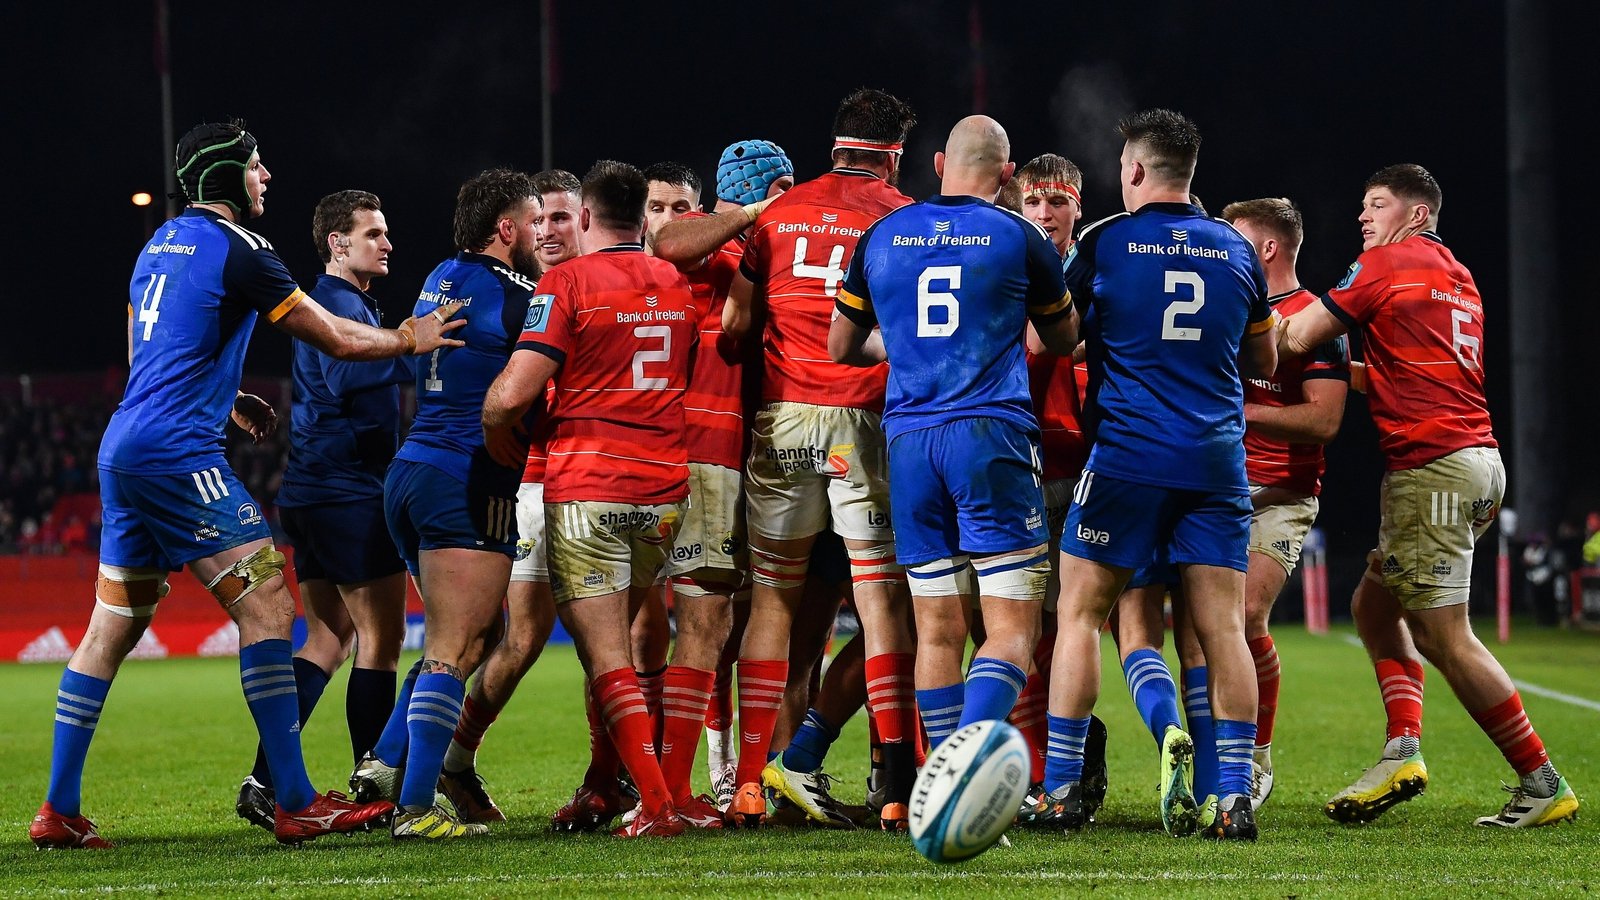 Leinster-Munster rivalry hasnt lost its edge